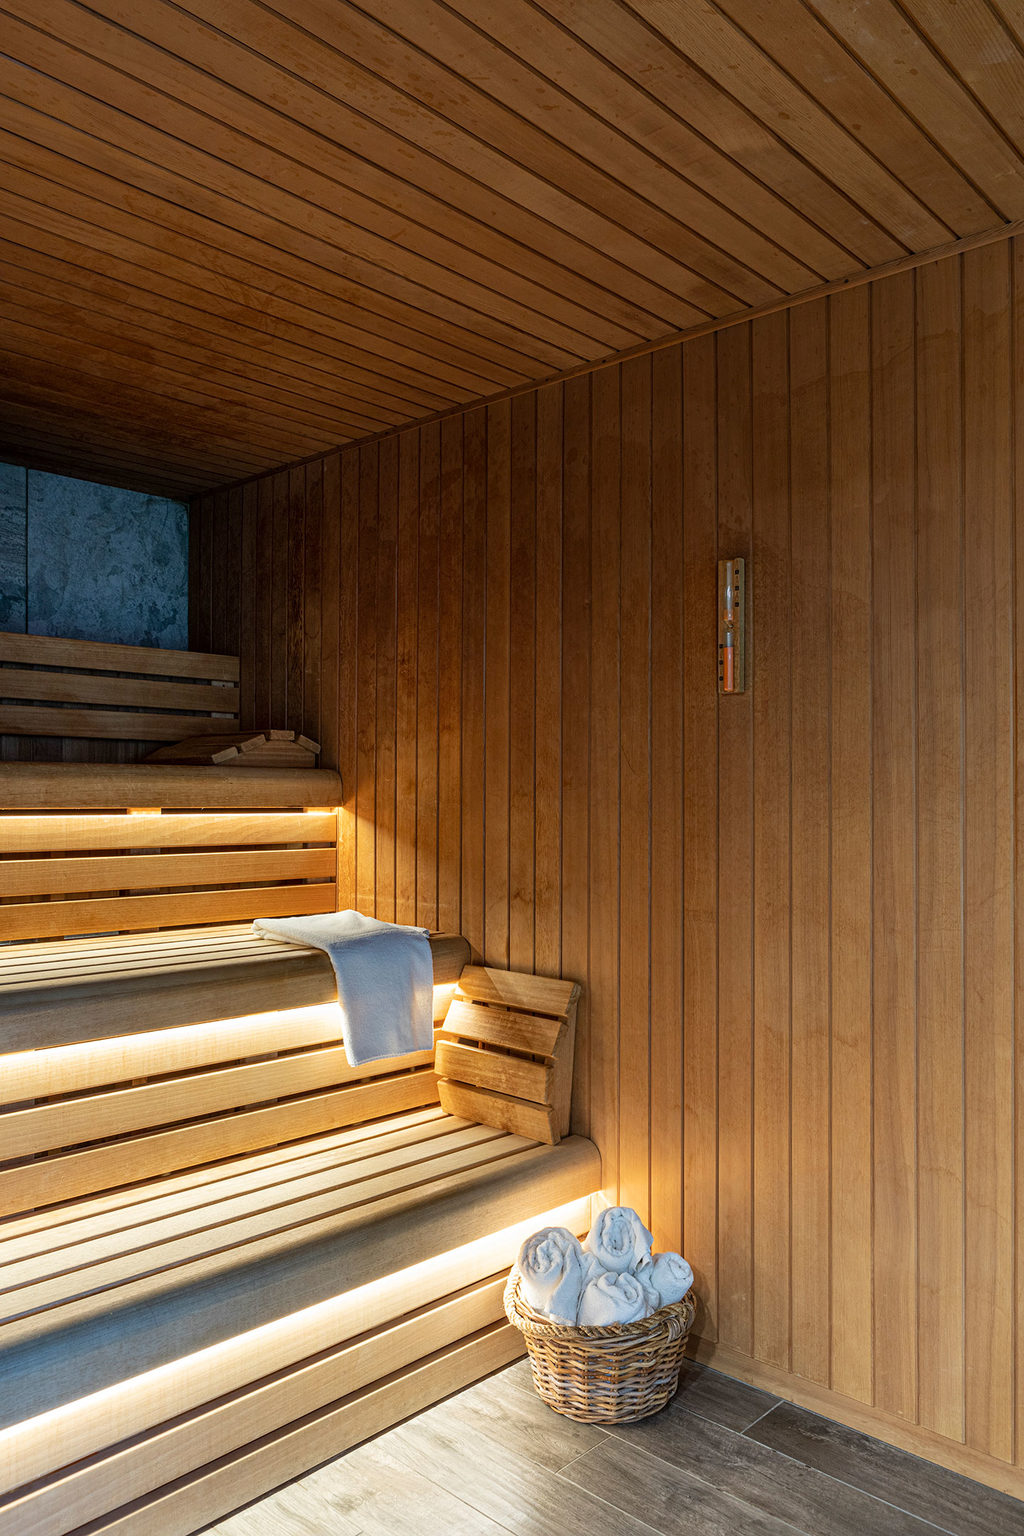 Inside a sauna at the Swinton Estate spa near Harrogate and the Yorkshire Dales in North Yorkshire